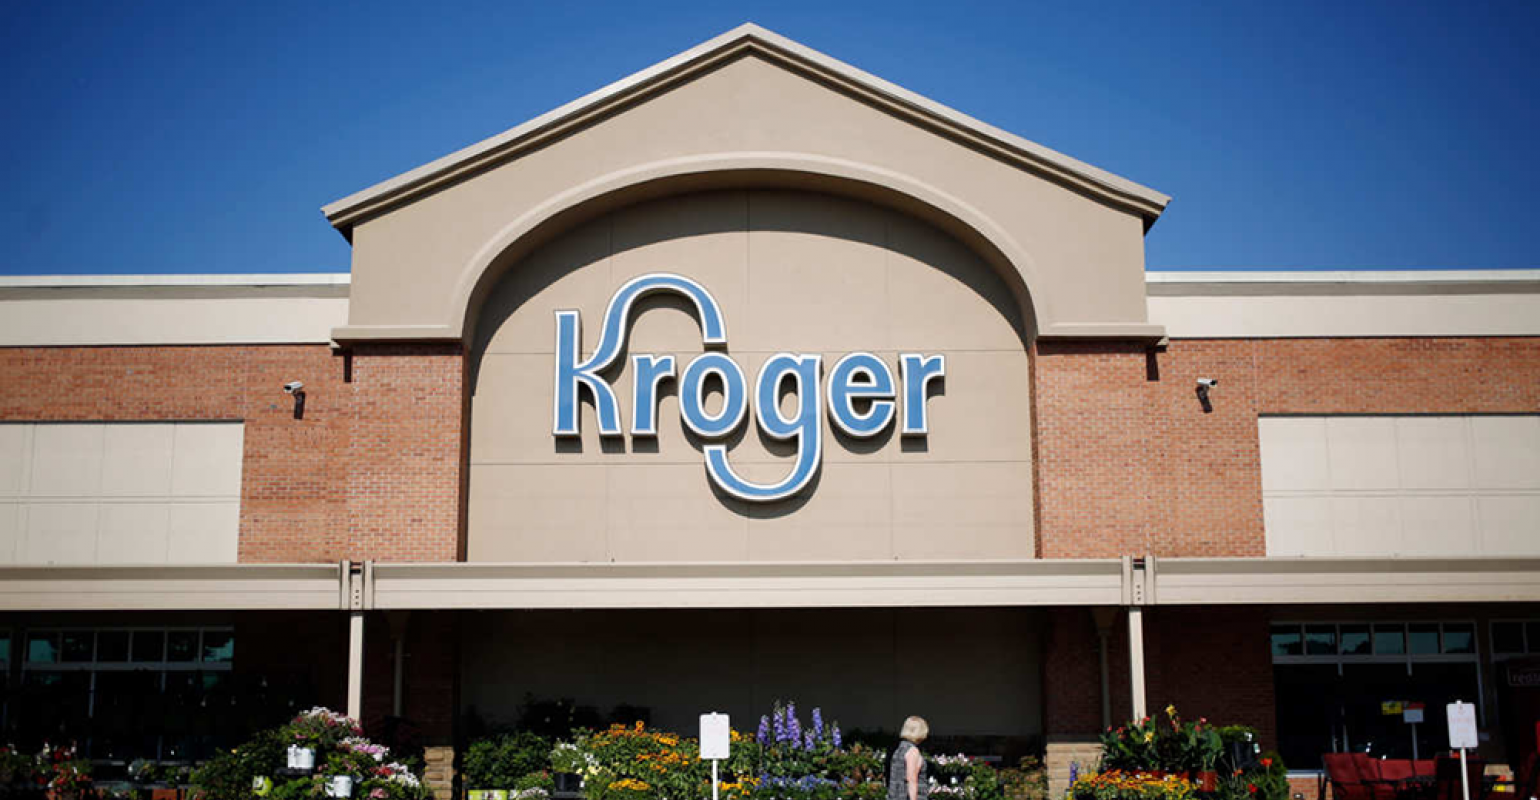 Our Brand – The Kroger Co.